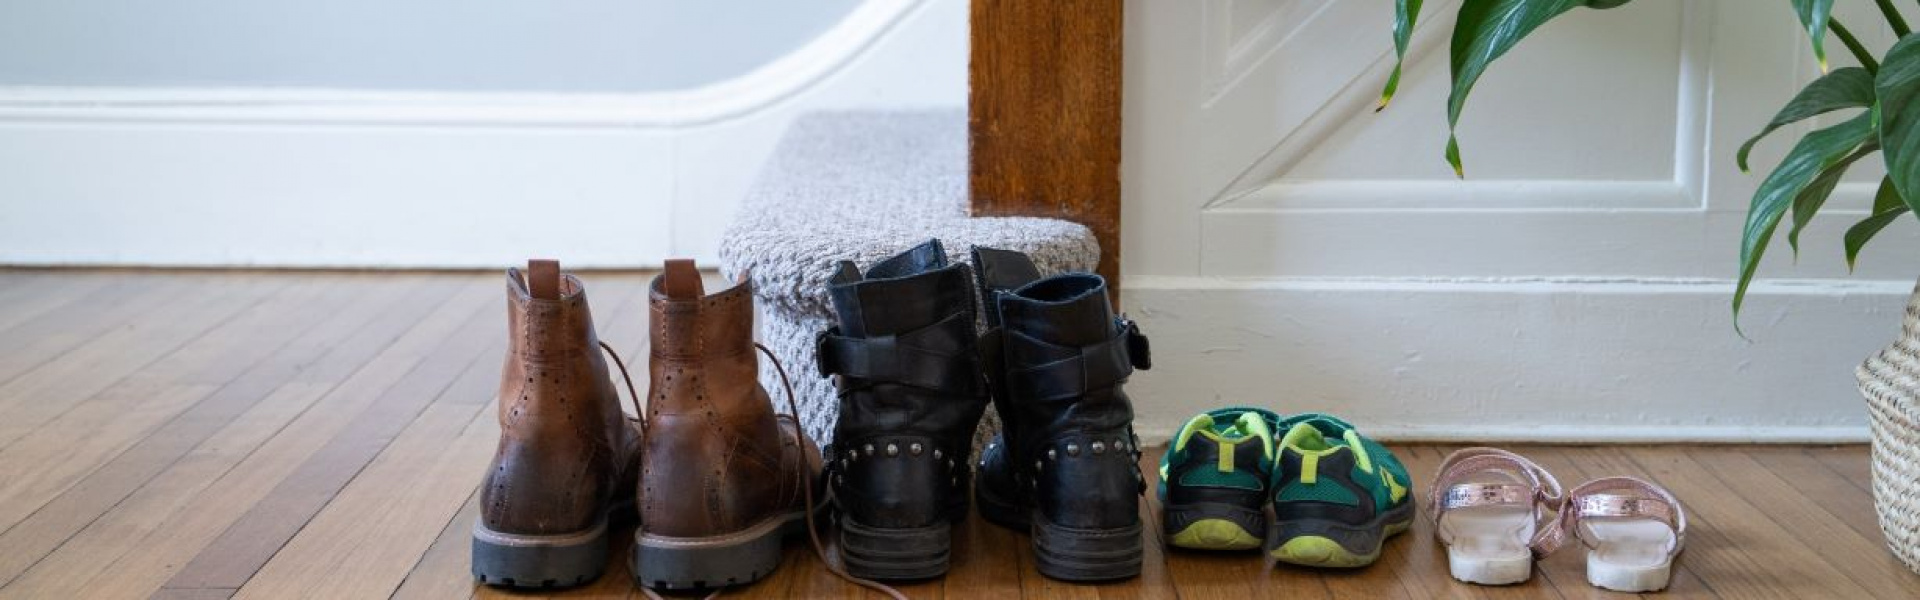 Family of four shoes lined up at foot of staircase.